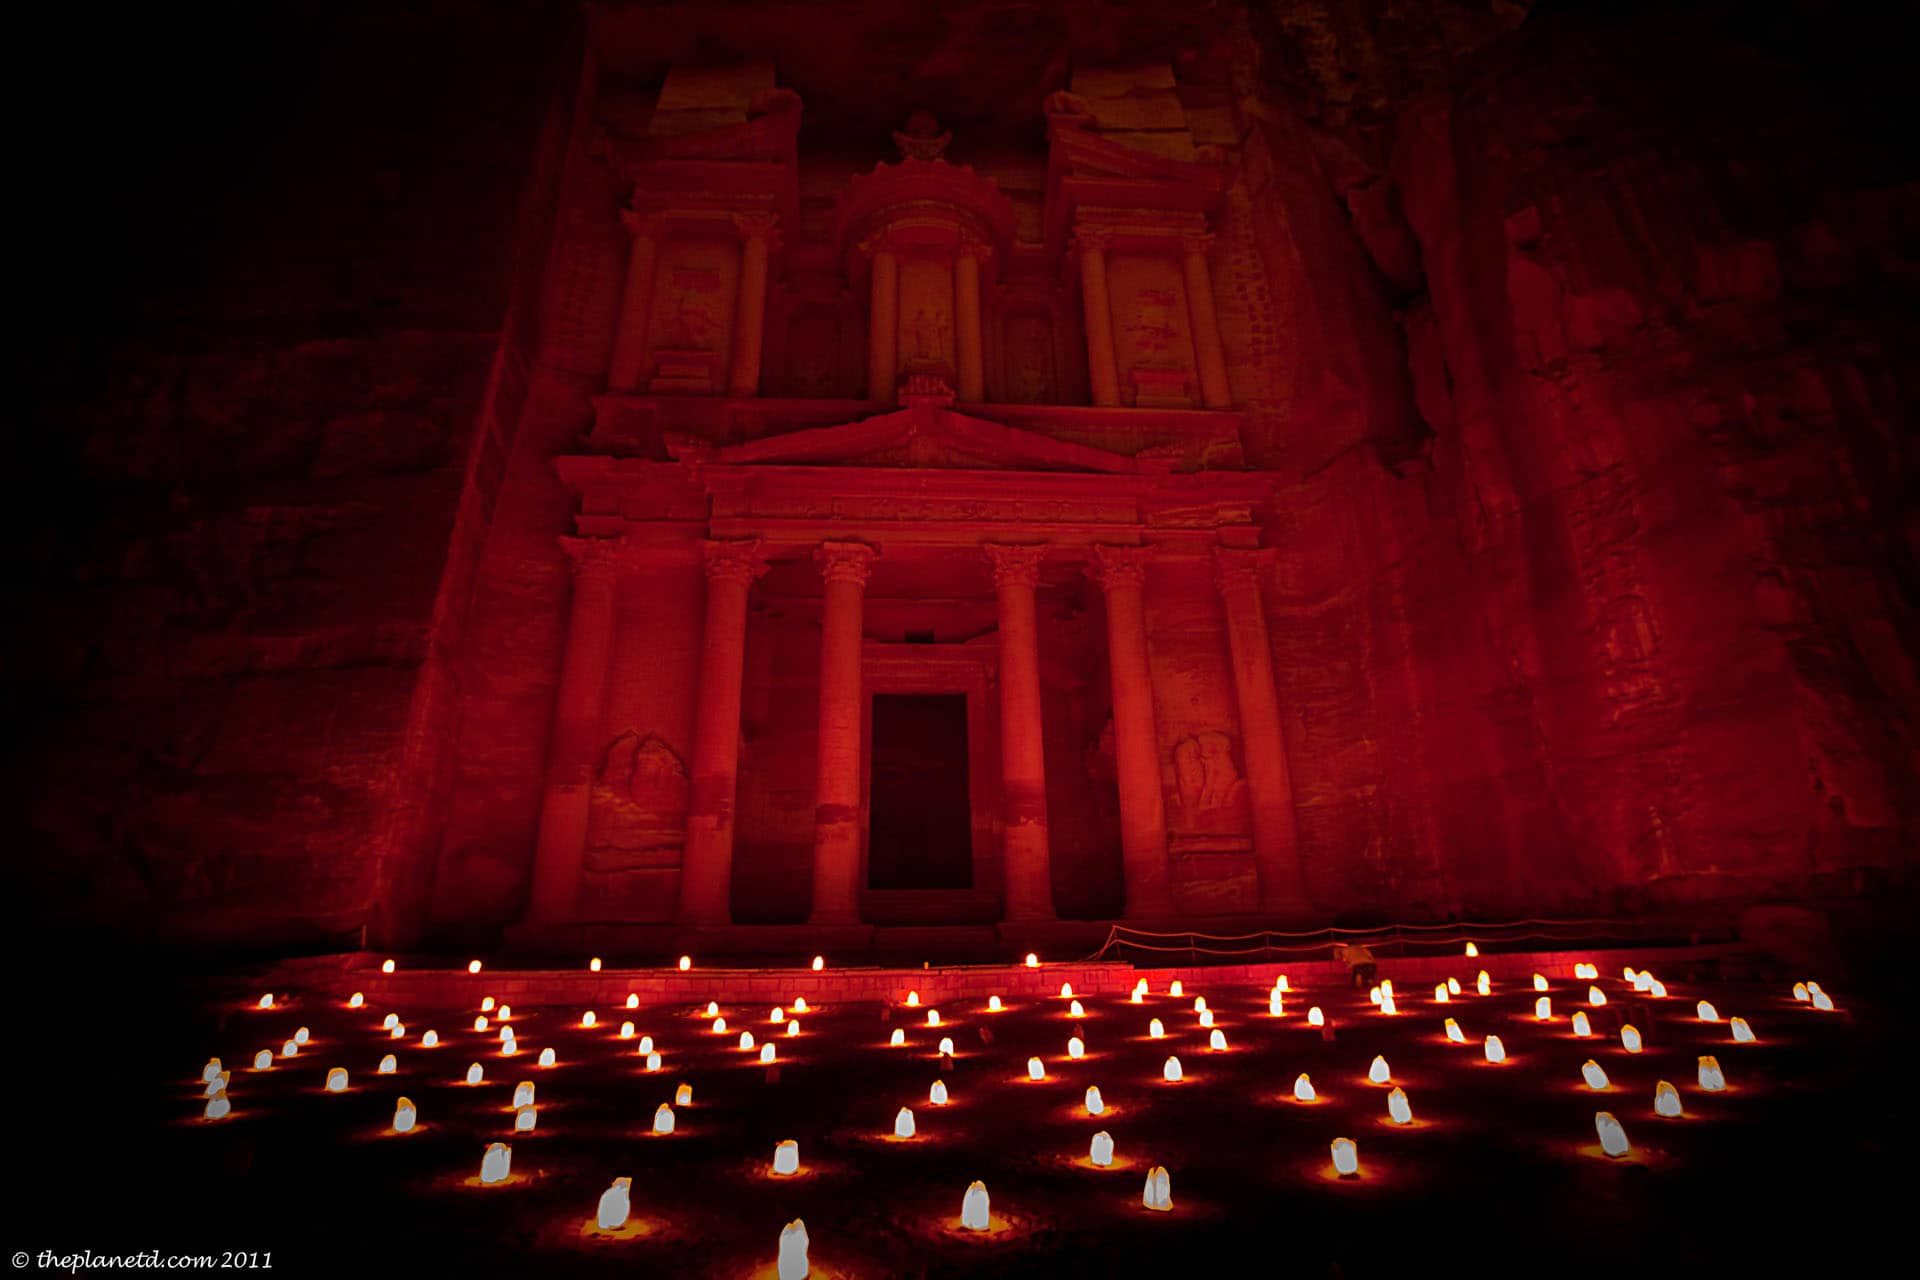 petra at night jordan is one of the most beautiful places in the world